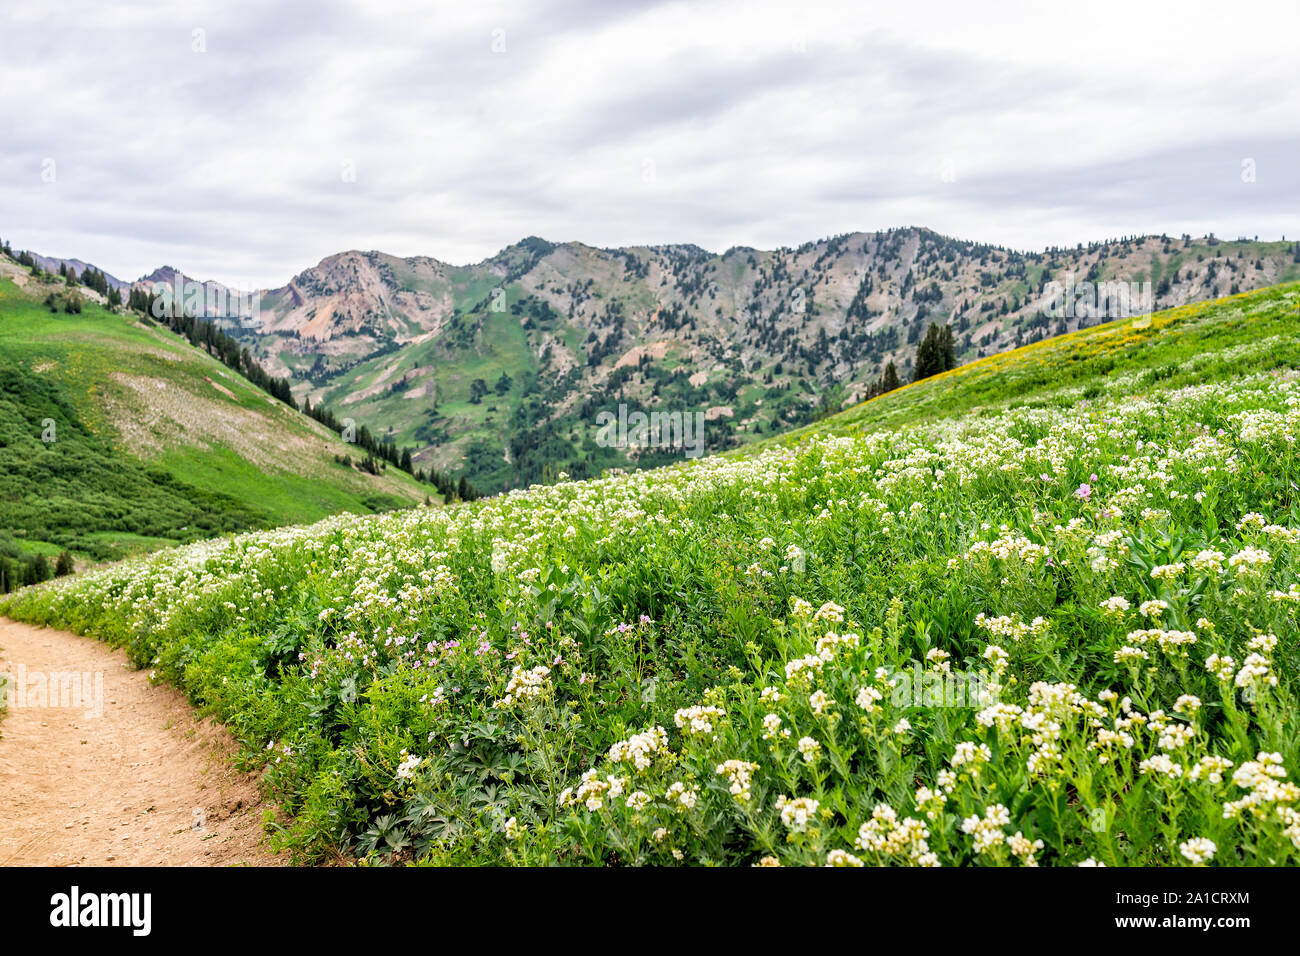 Albion Basin, Utah summer 2019 view of meadows trail in wildflowers season in Wasatch mountains with many white Jacob's ladder flowers Stock Photo